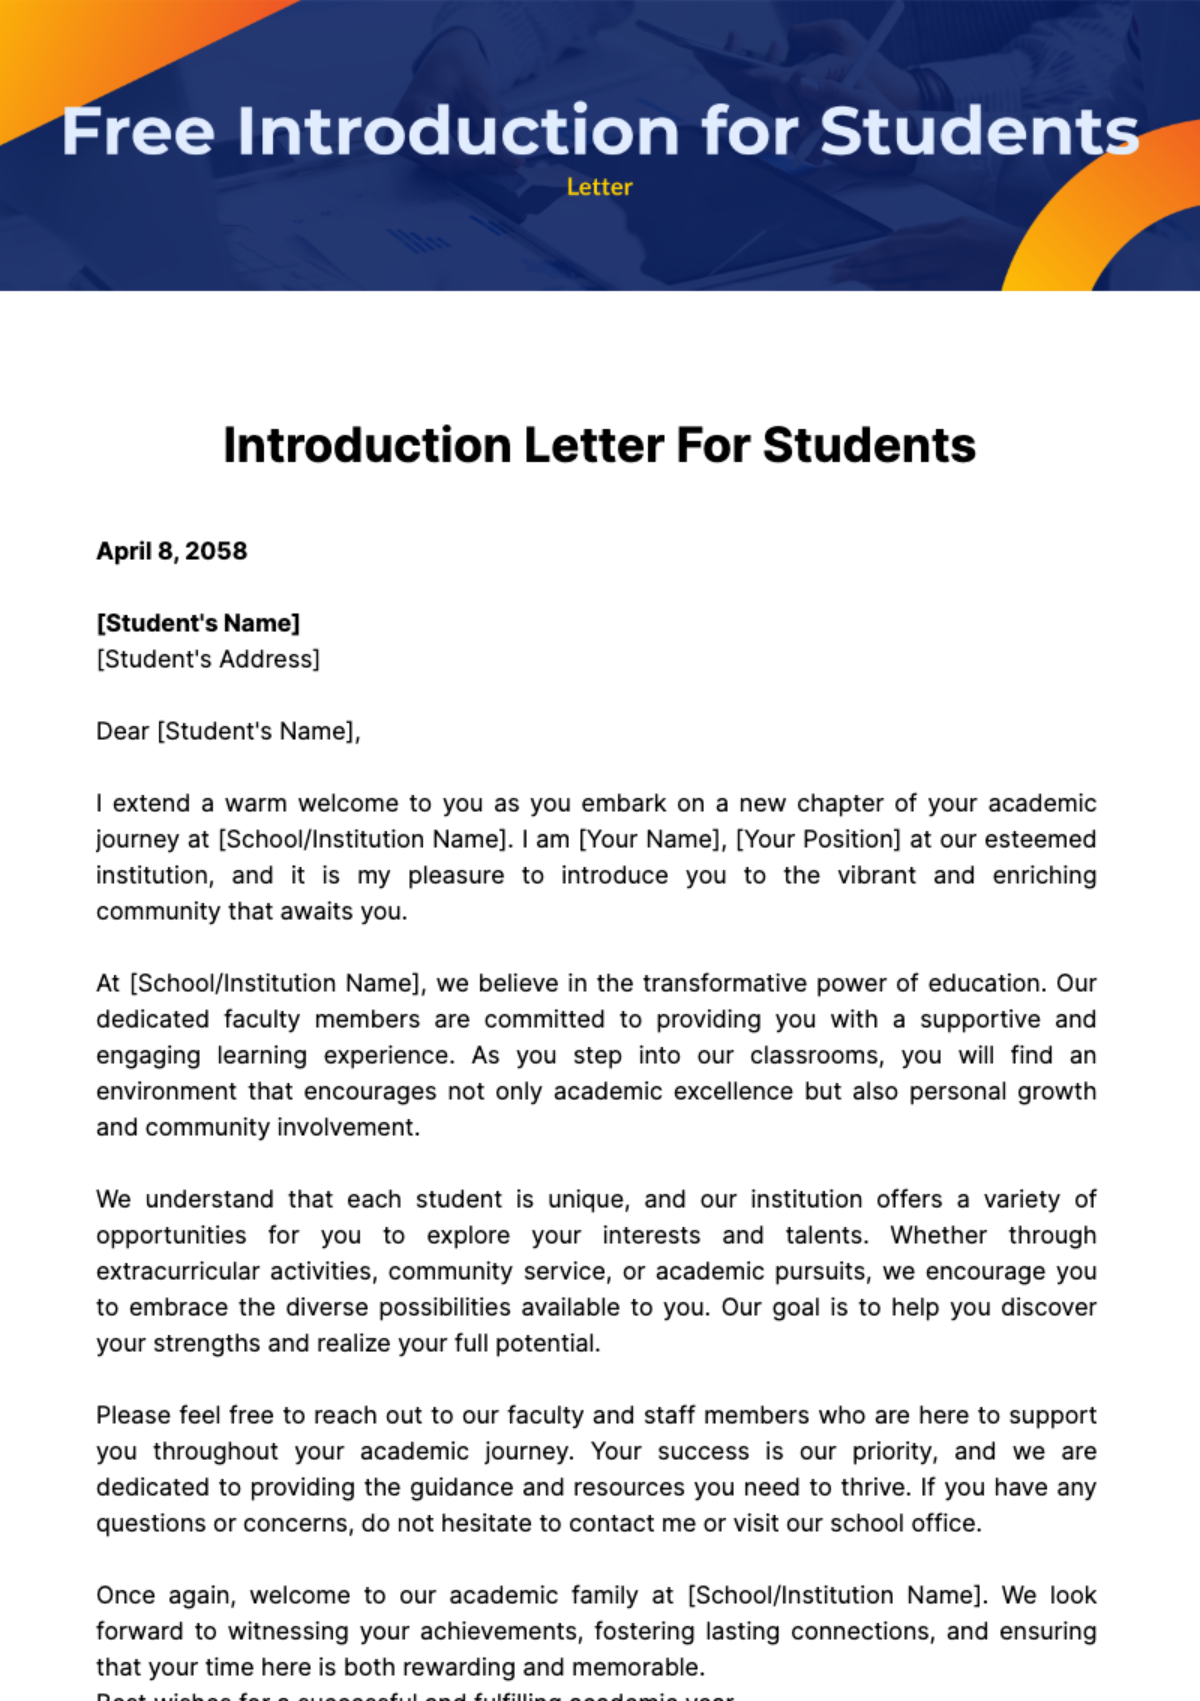 Free Introduction Letter for Students Template